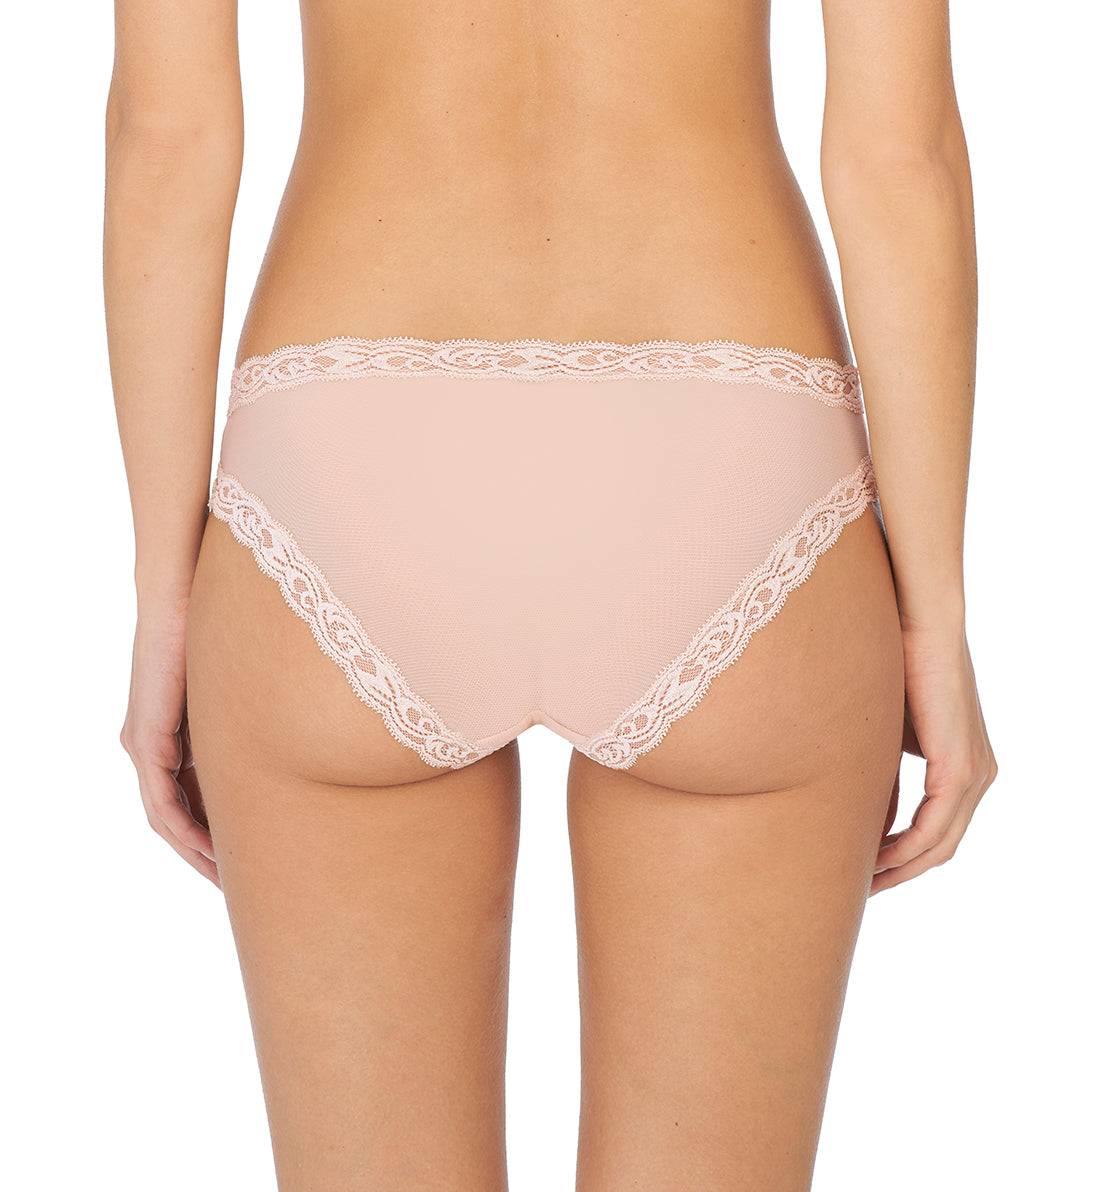 Natori Feathers Hipster Panty (753023),Small,Cameo Rose - Cameo Rose,Small